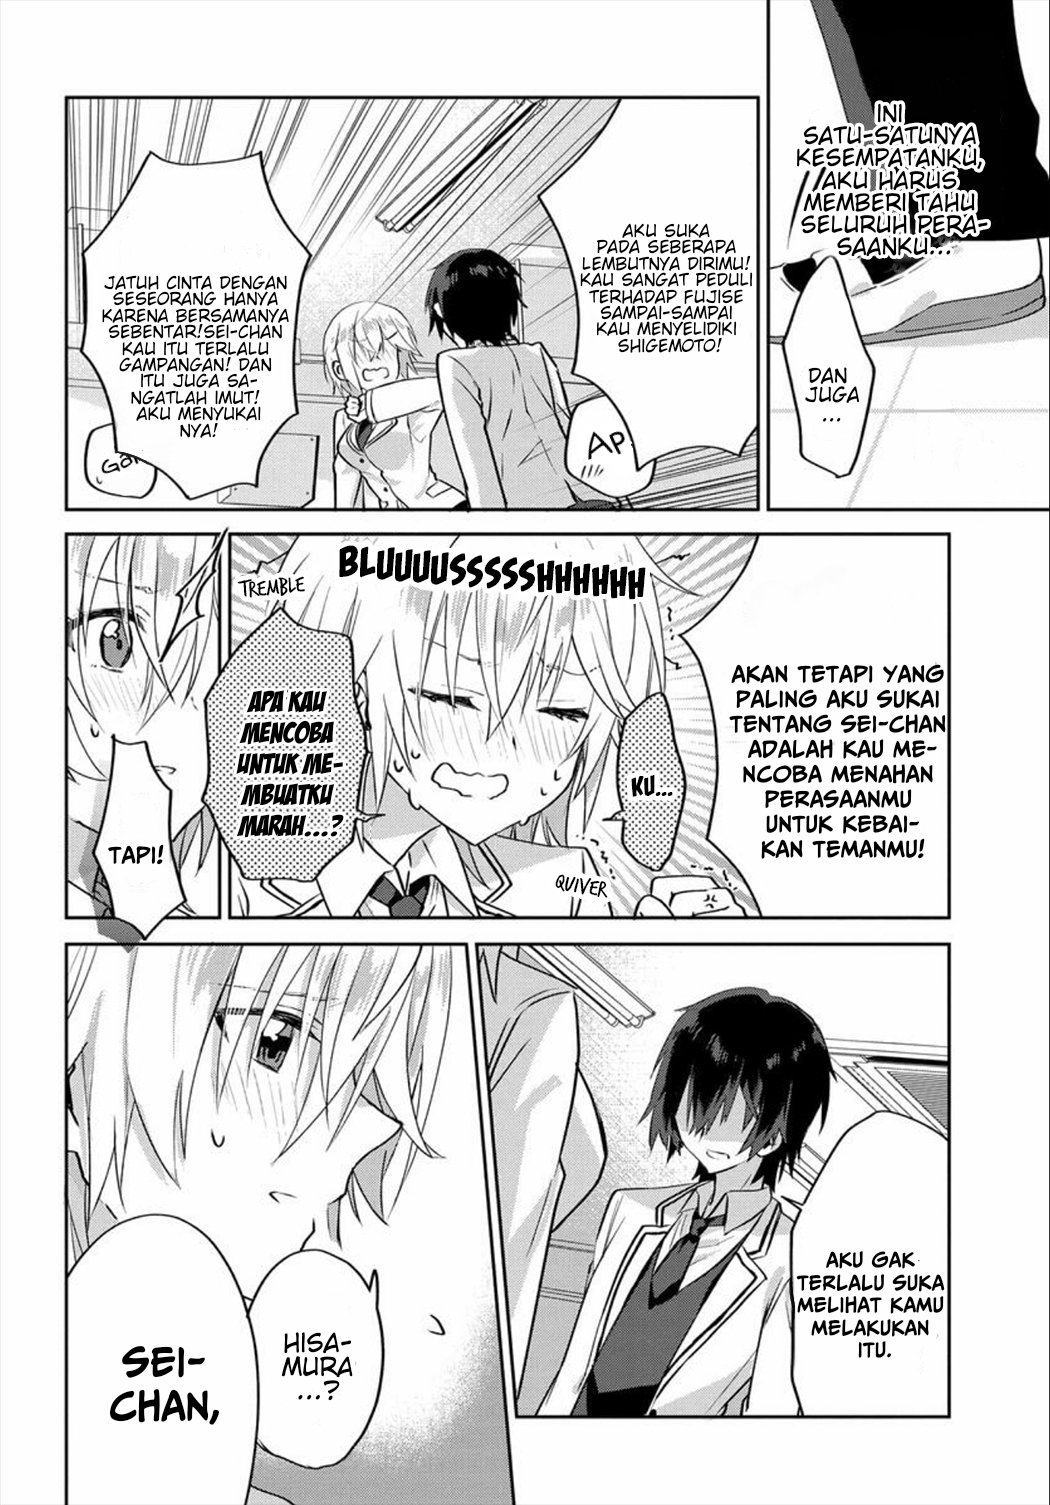 Since I'Ve Entered The World Of Romantic Comedy Manga, I'Ll Do My Best To Make The Losing Heroine Happy. Chapter 1 - 241